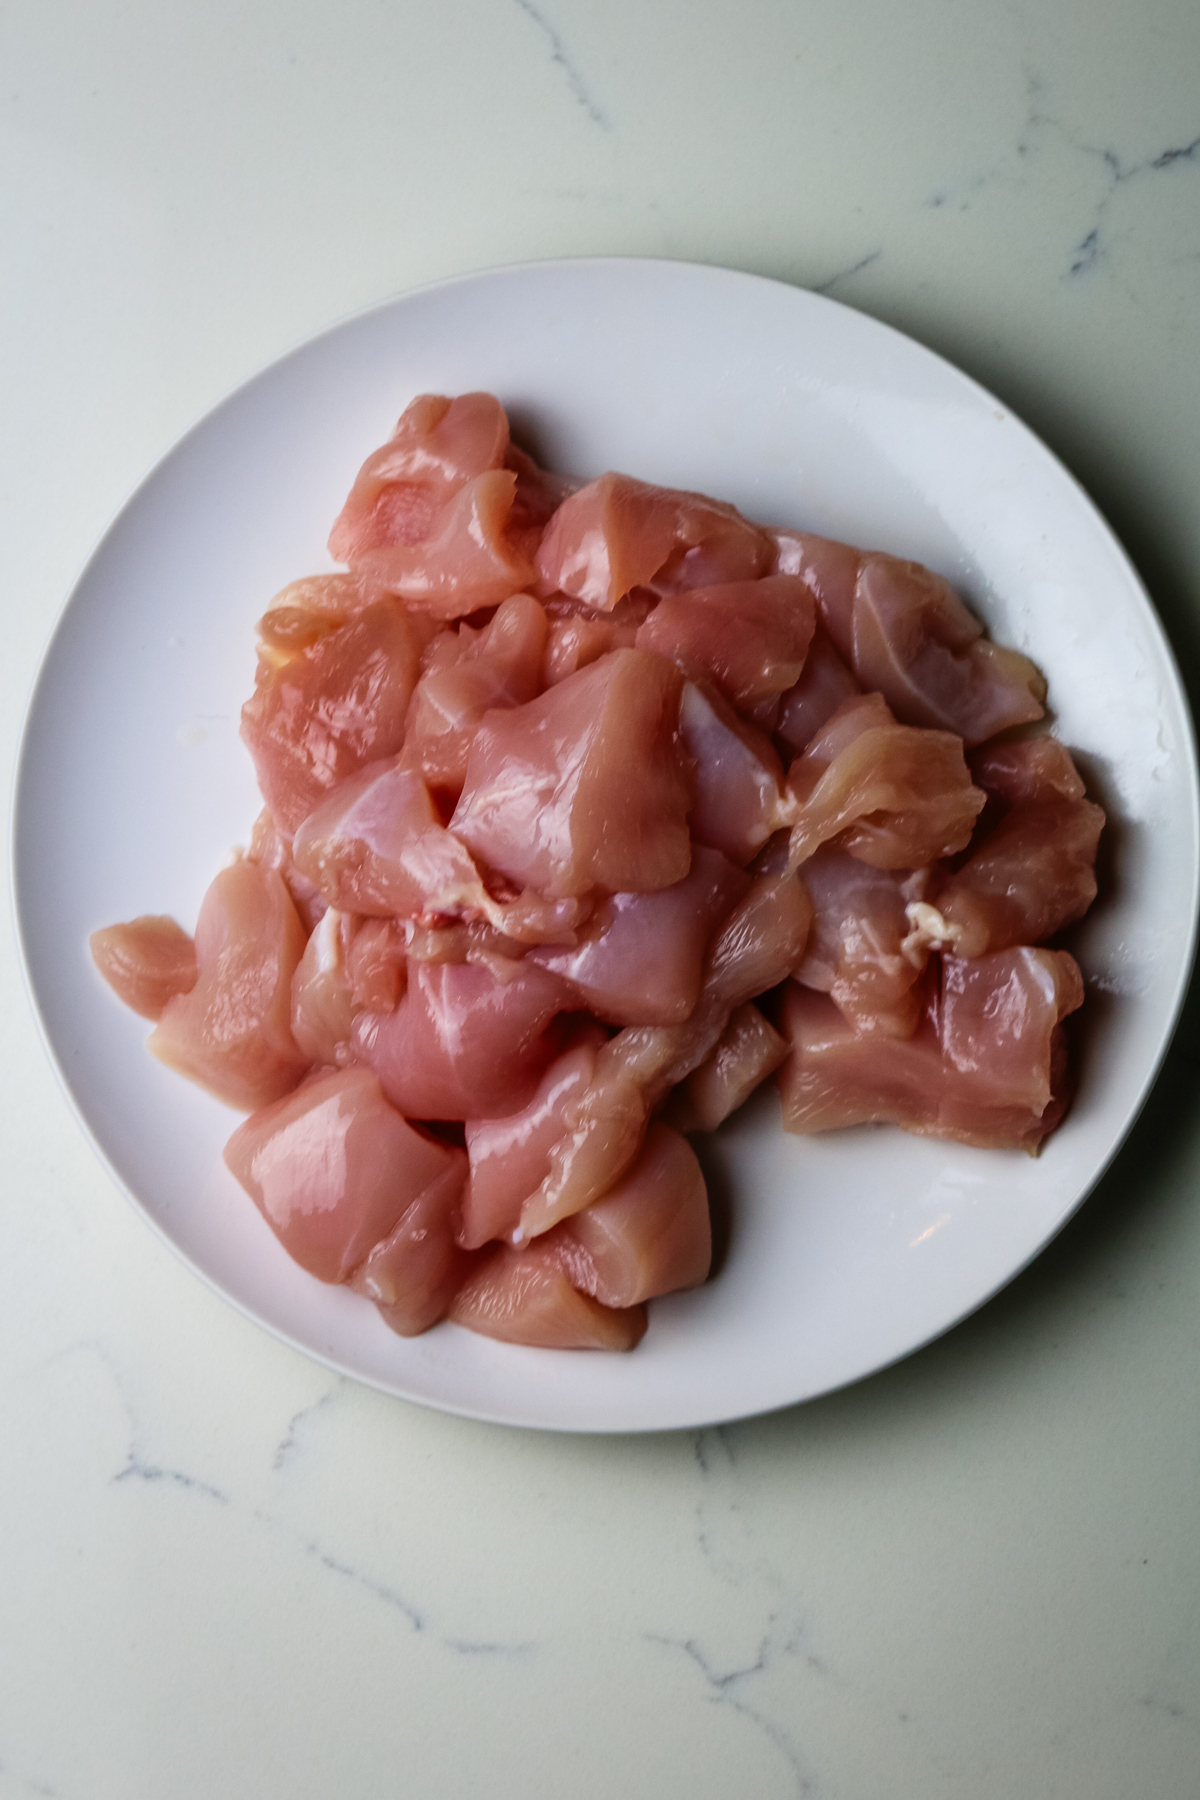 cubed raw chicken on a white plate.